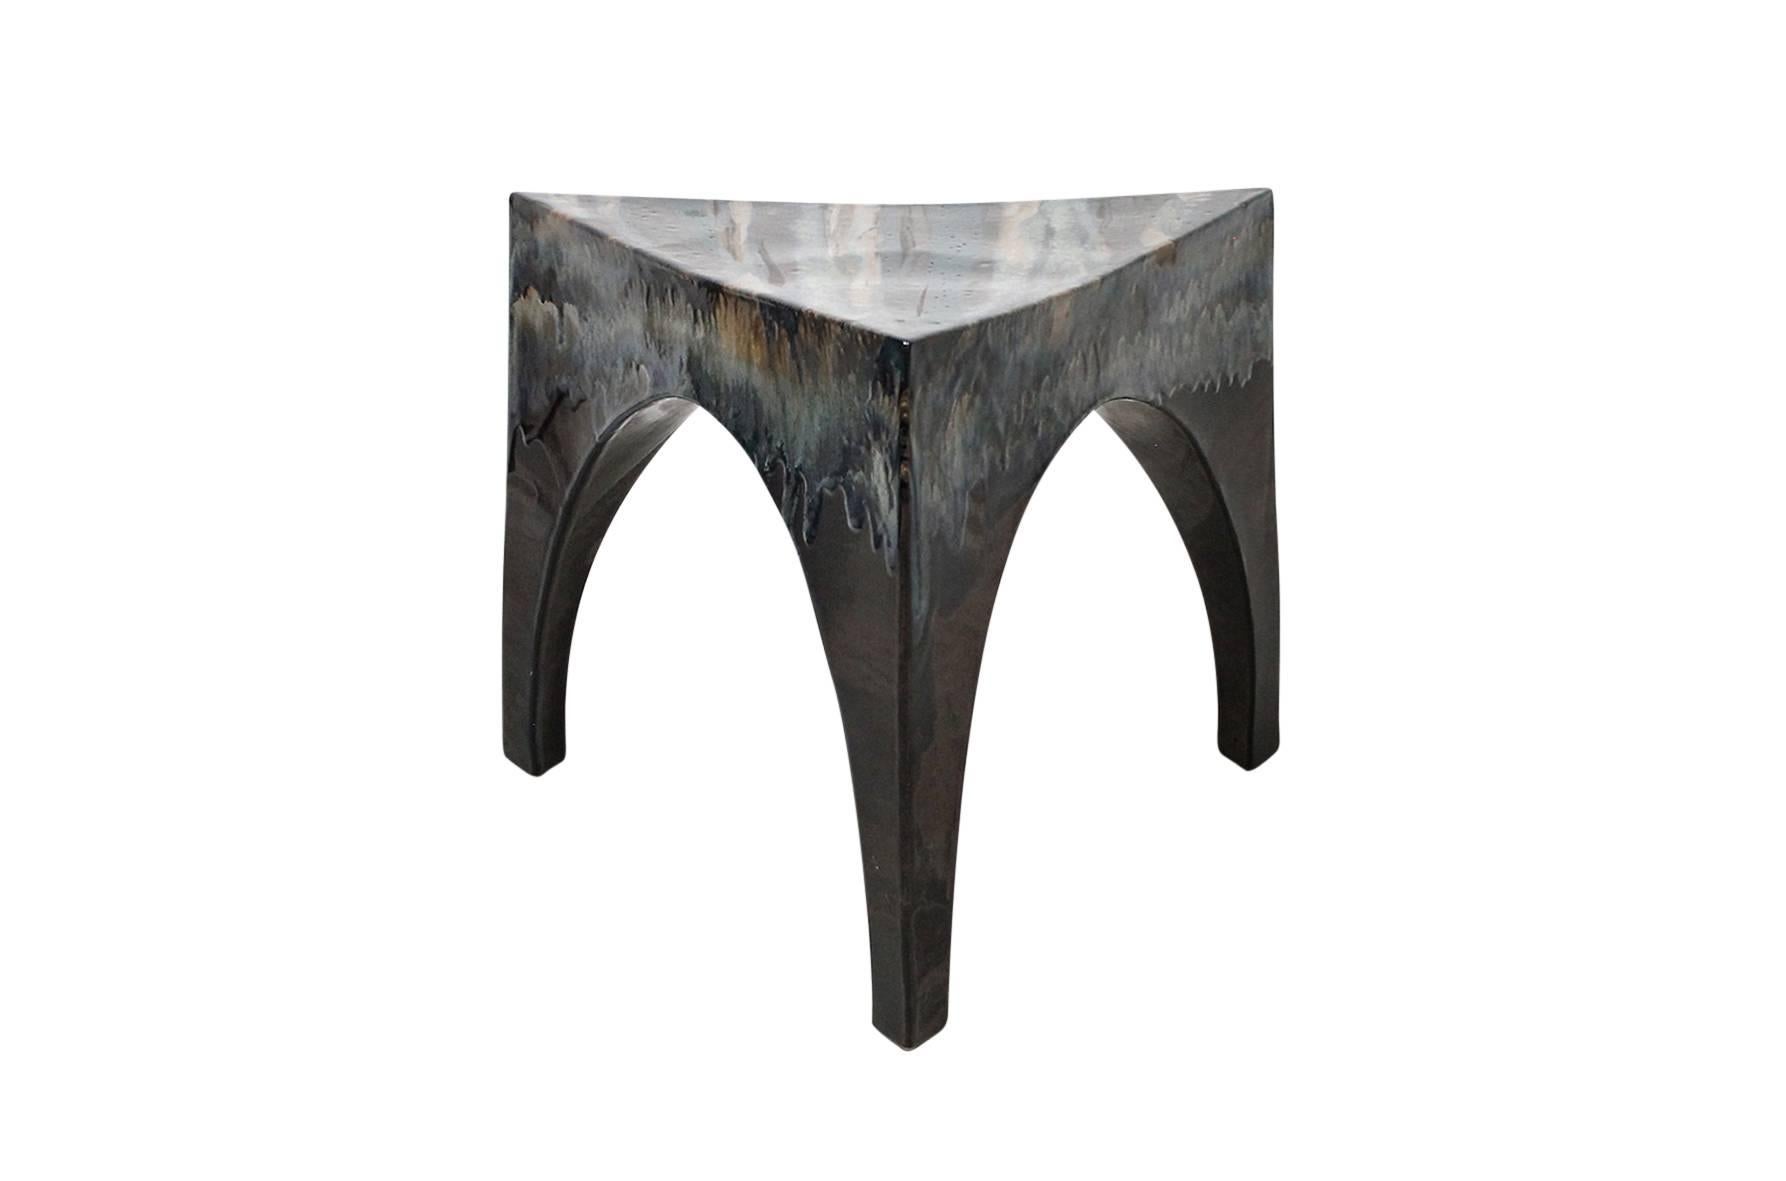 Triangular three-legged studio pottery table or stool. Suitable for indoor and outdoor use. Expertly crafted piece with artistic drip glazing over a matte black form.